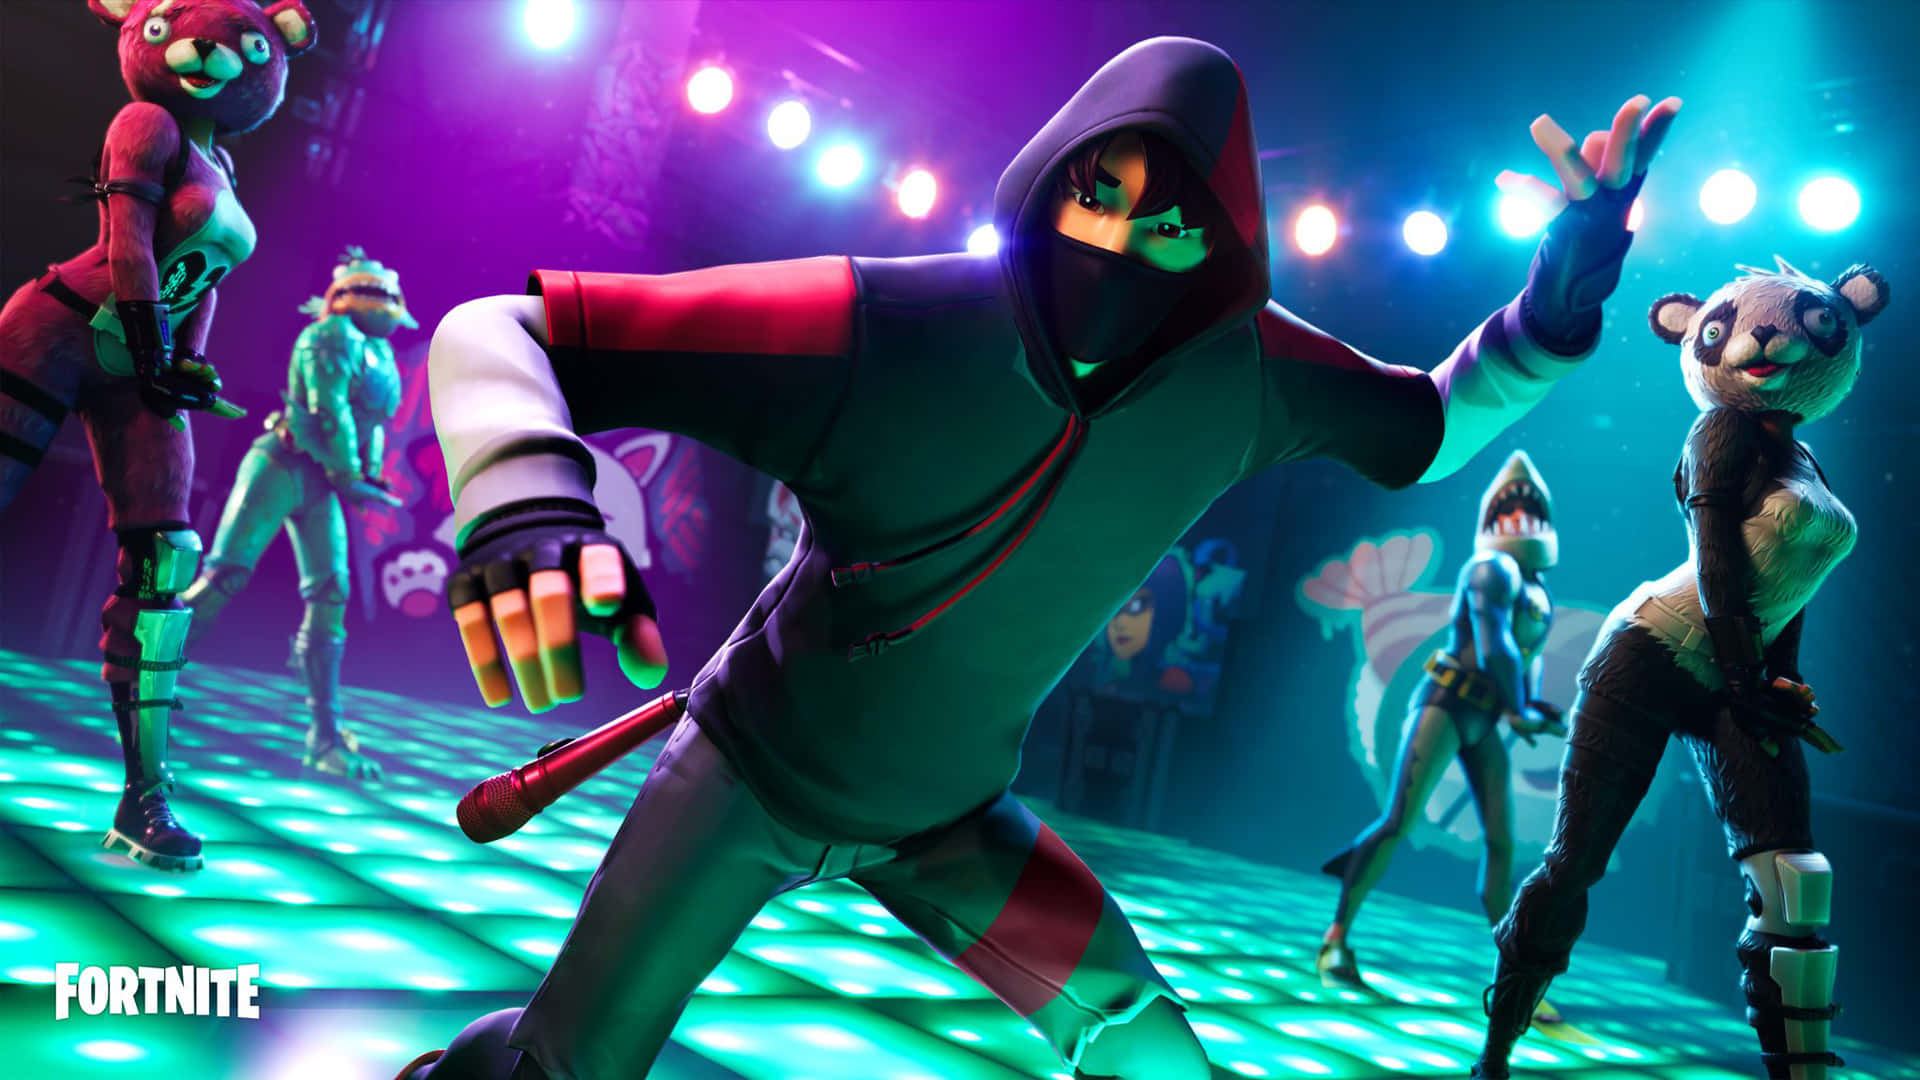 Get the stylish and exclusive Fortnite Ikonik Skin today Wallpaper